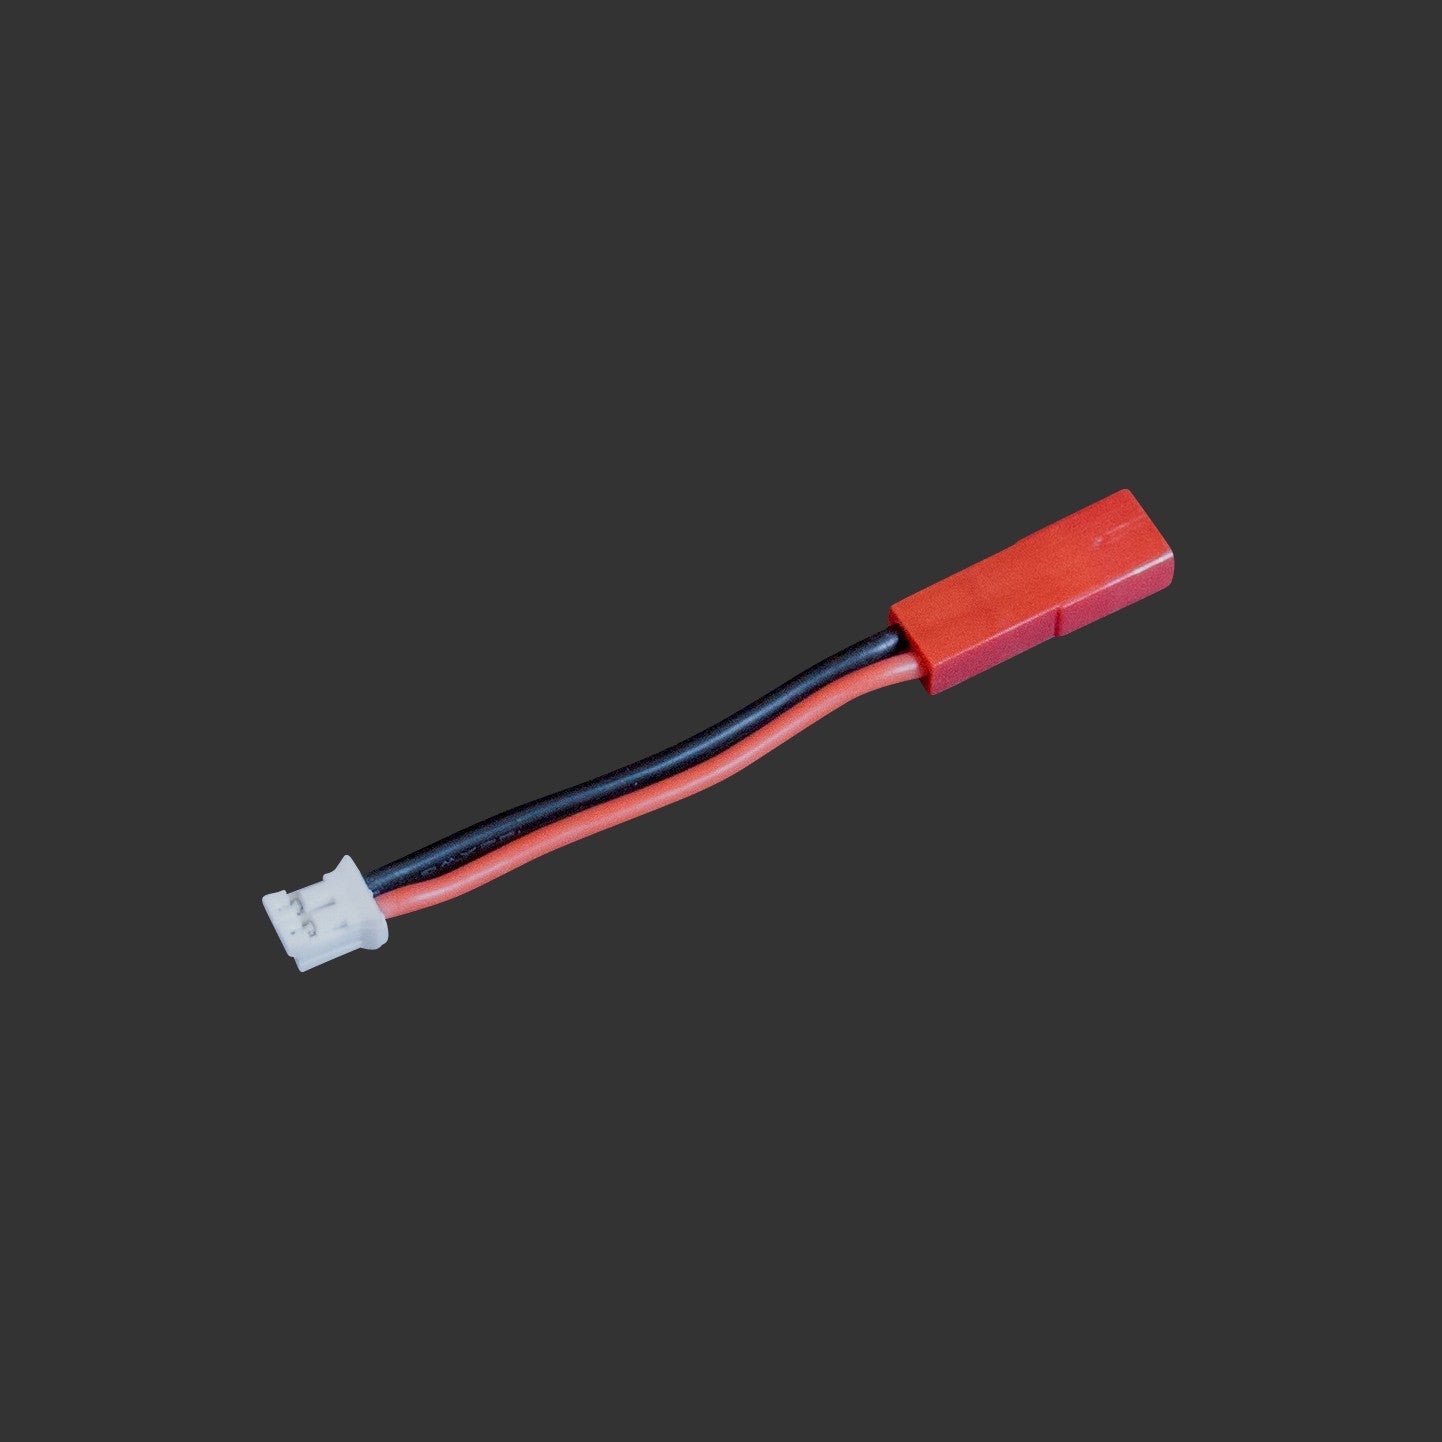 JST-PH2 to JST-SYP power cable